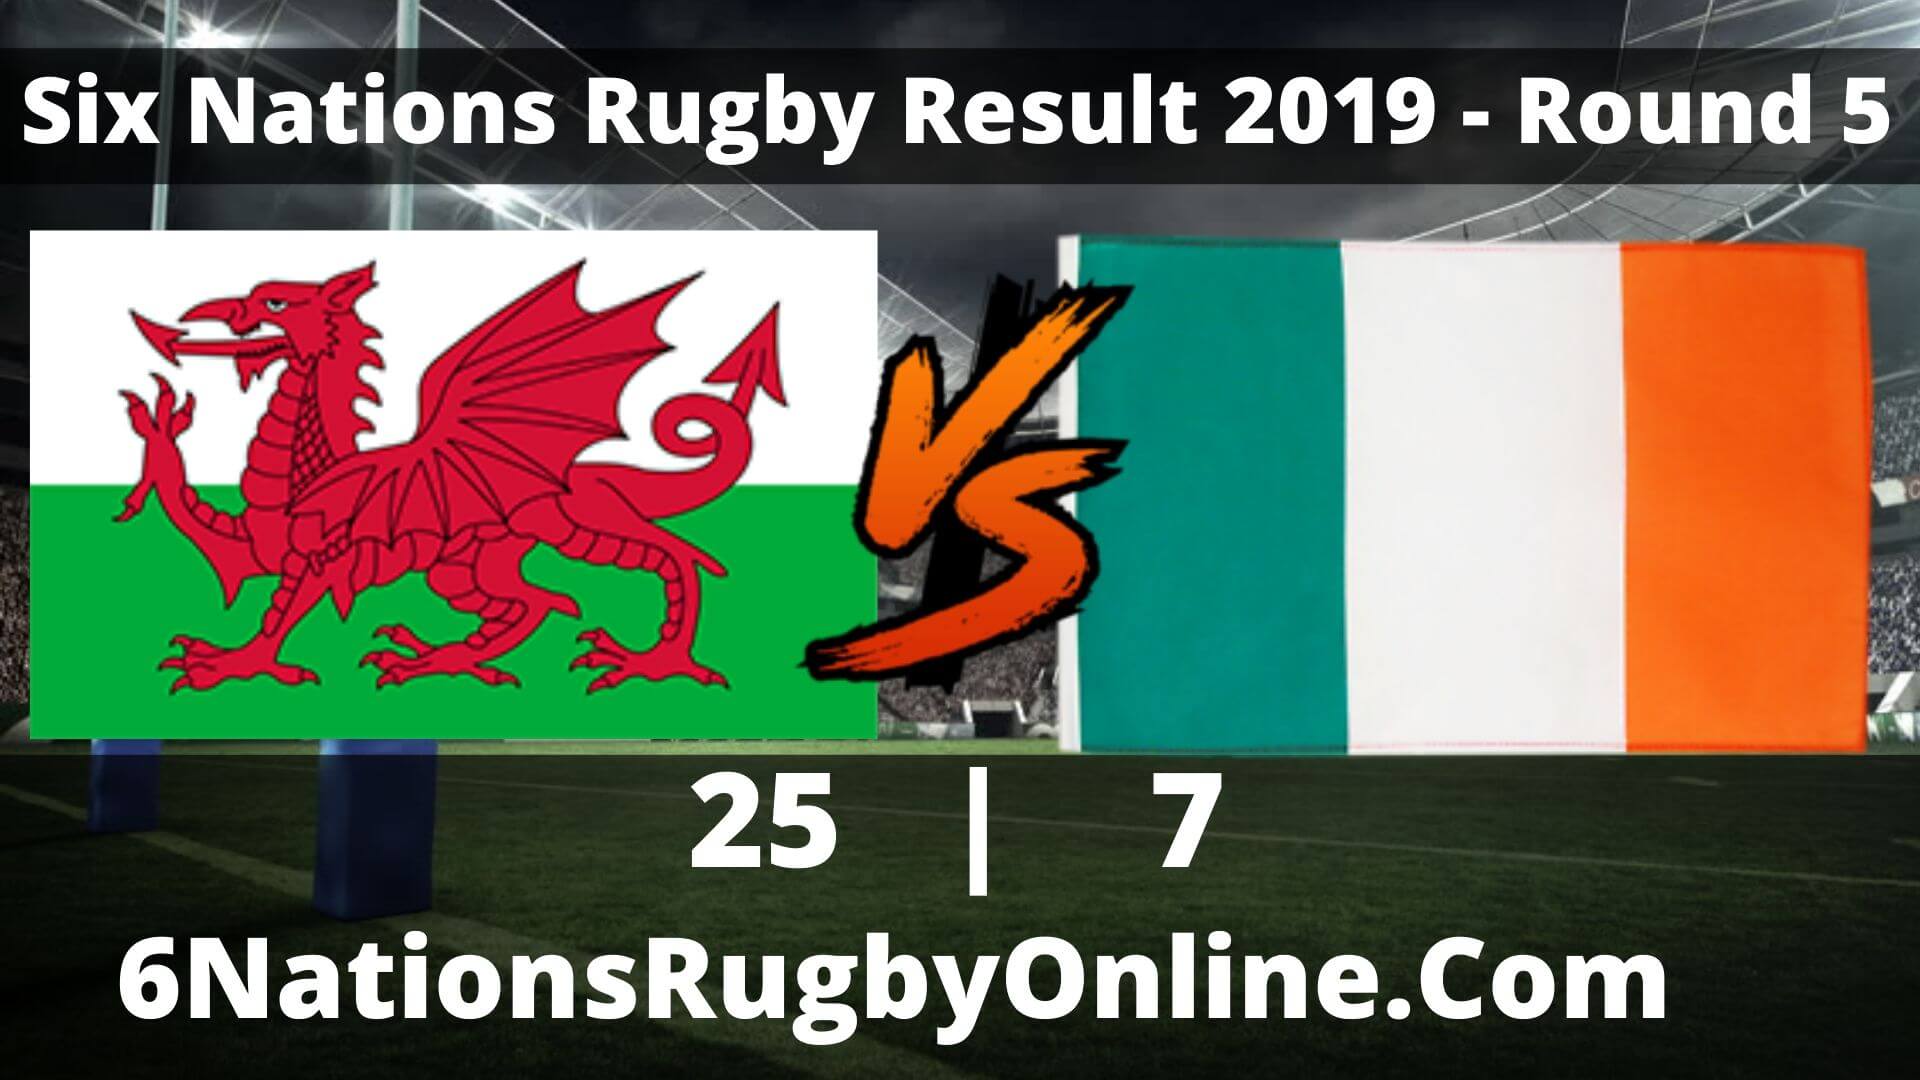 WALES VS IRELAND Results 2019 | SIX NATIONS RUGBY ROUND 5